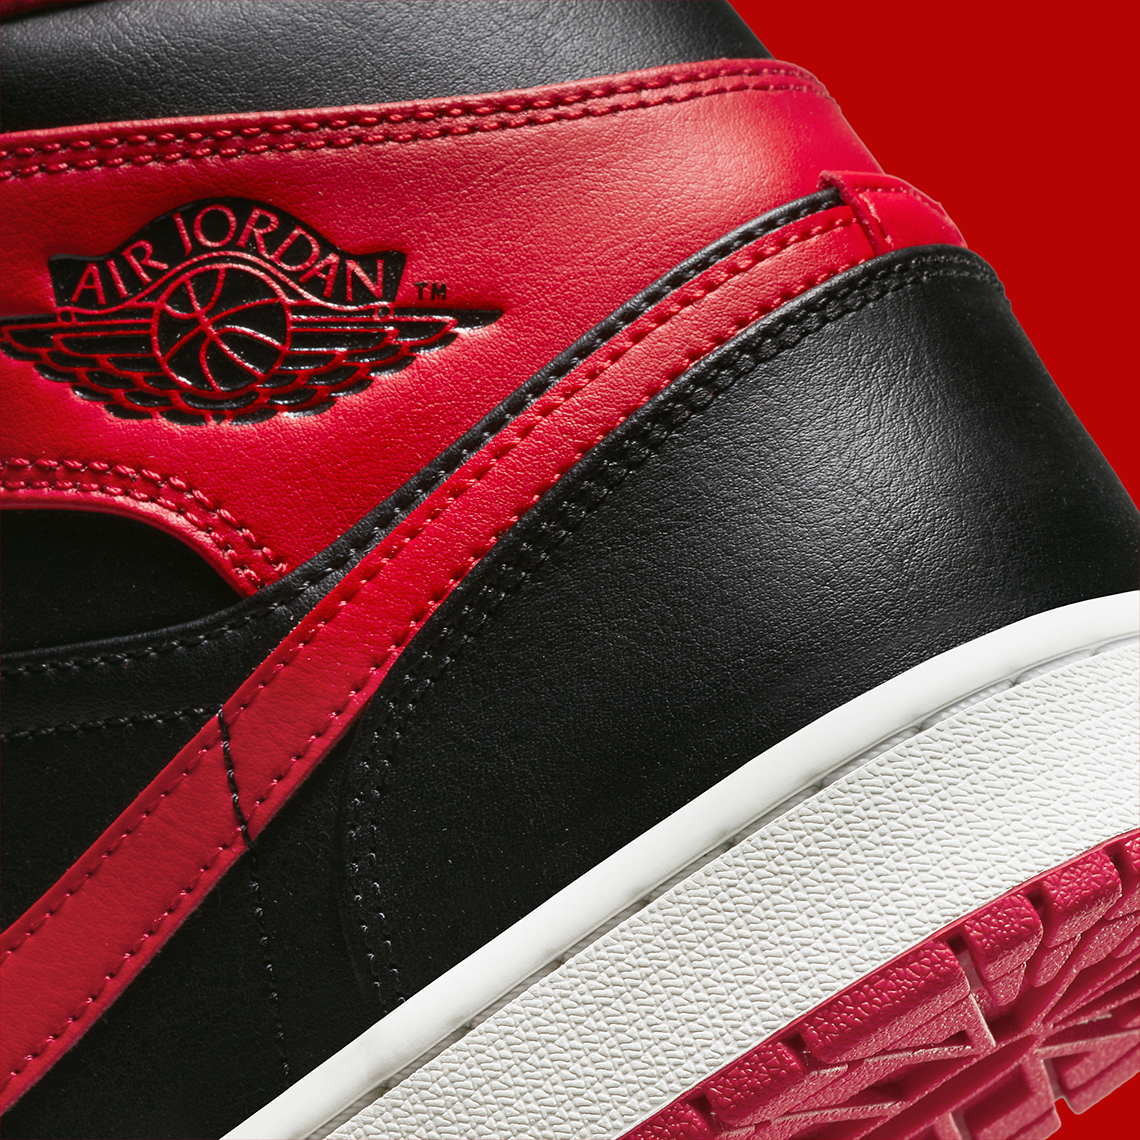 Jordan Brand is set to launch their latest Bred Dq8426 060 6